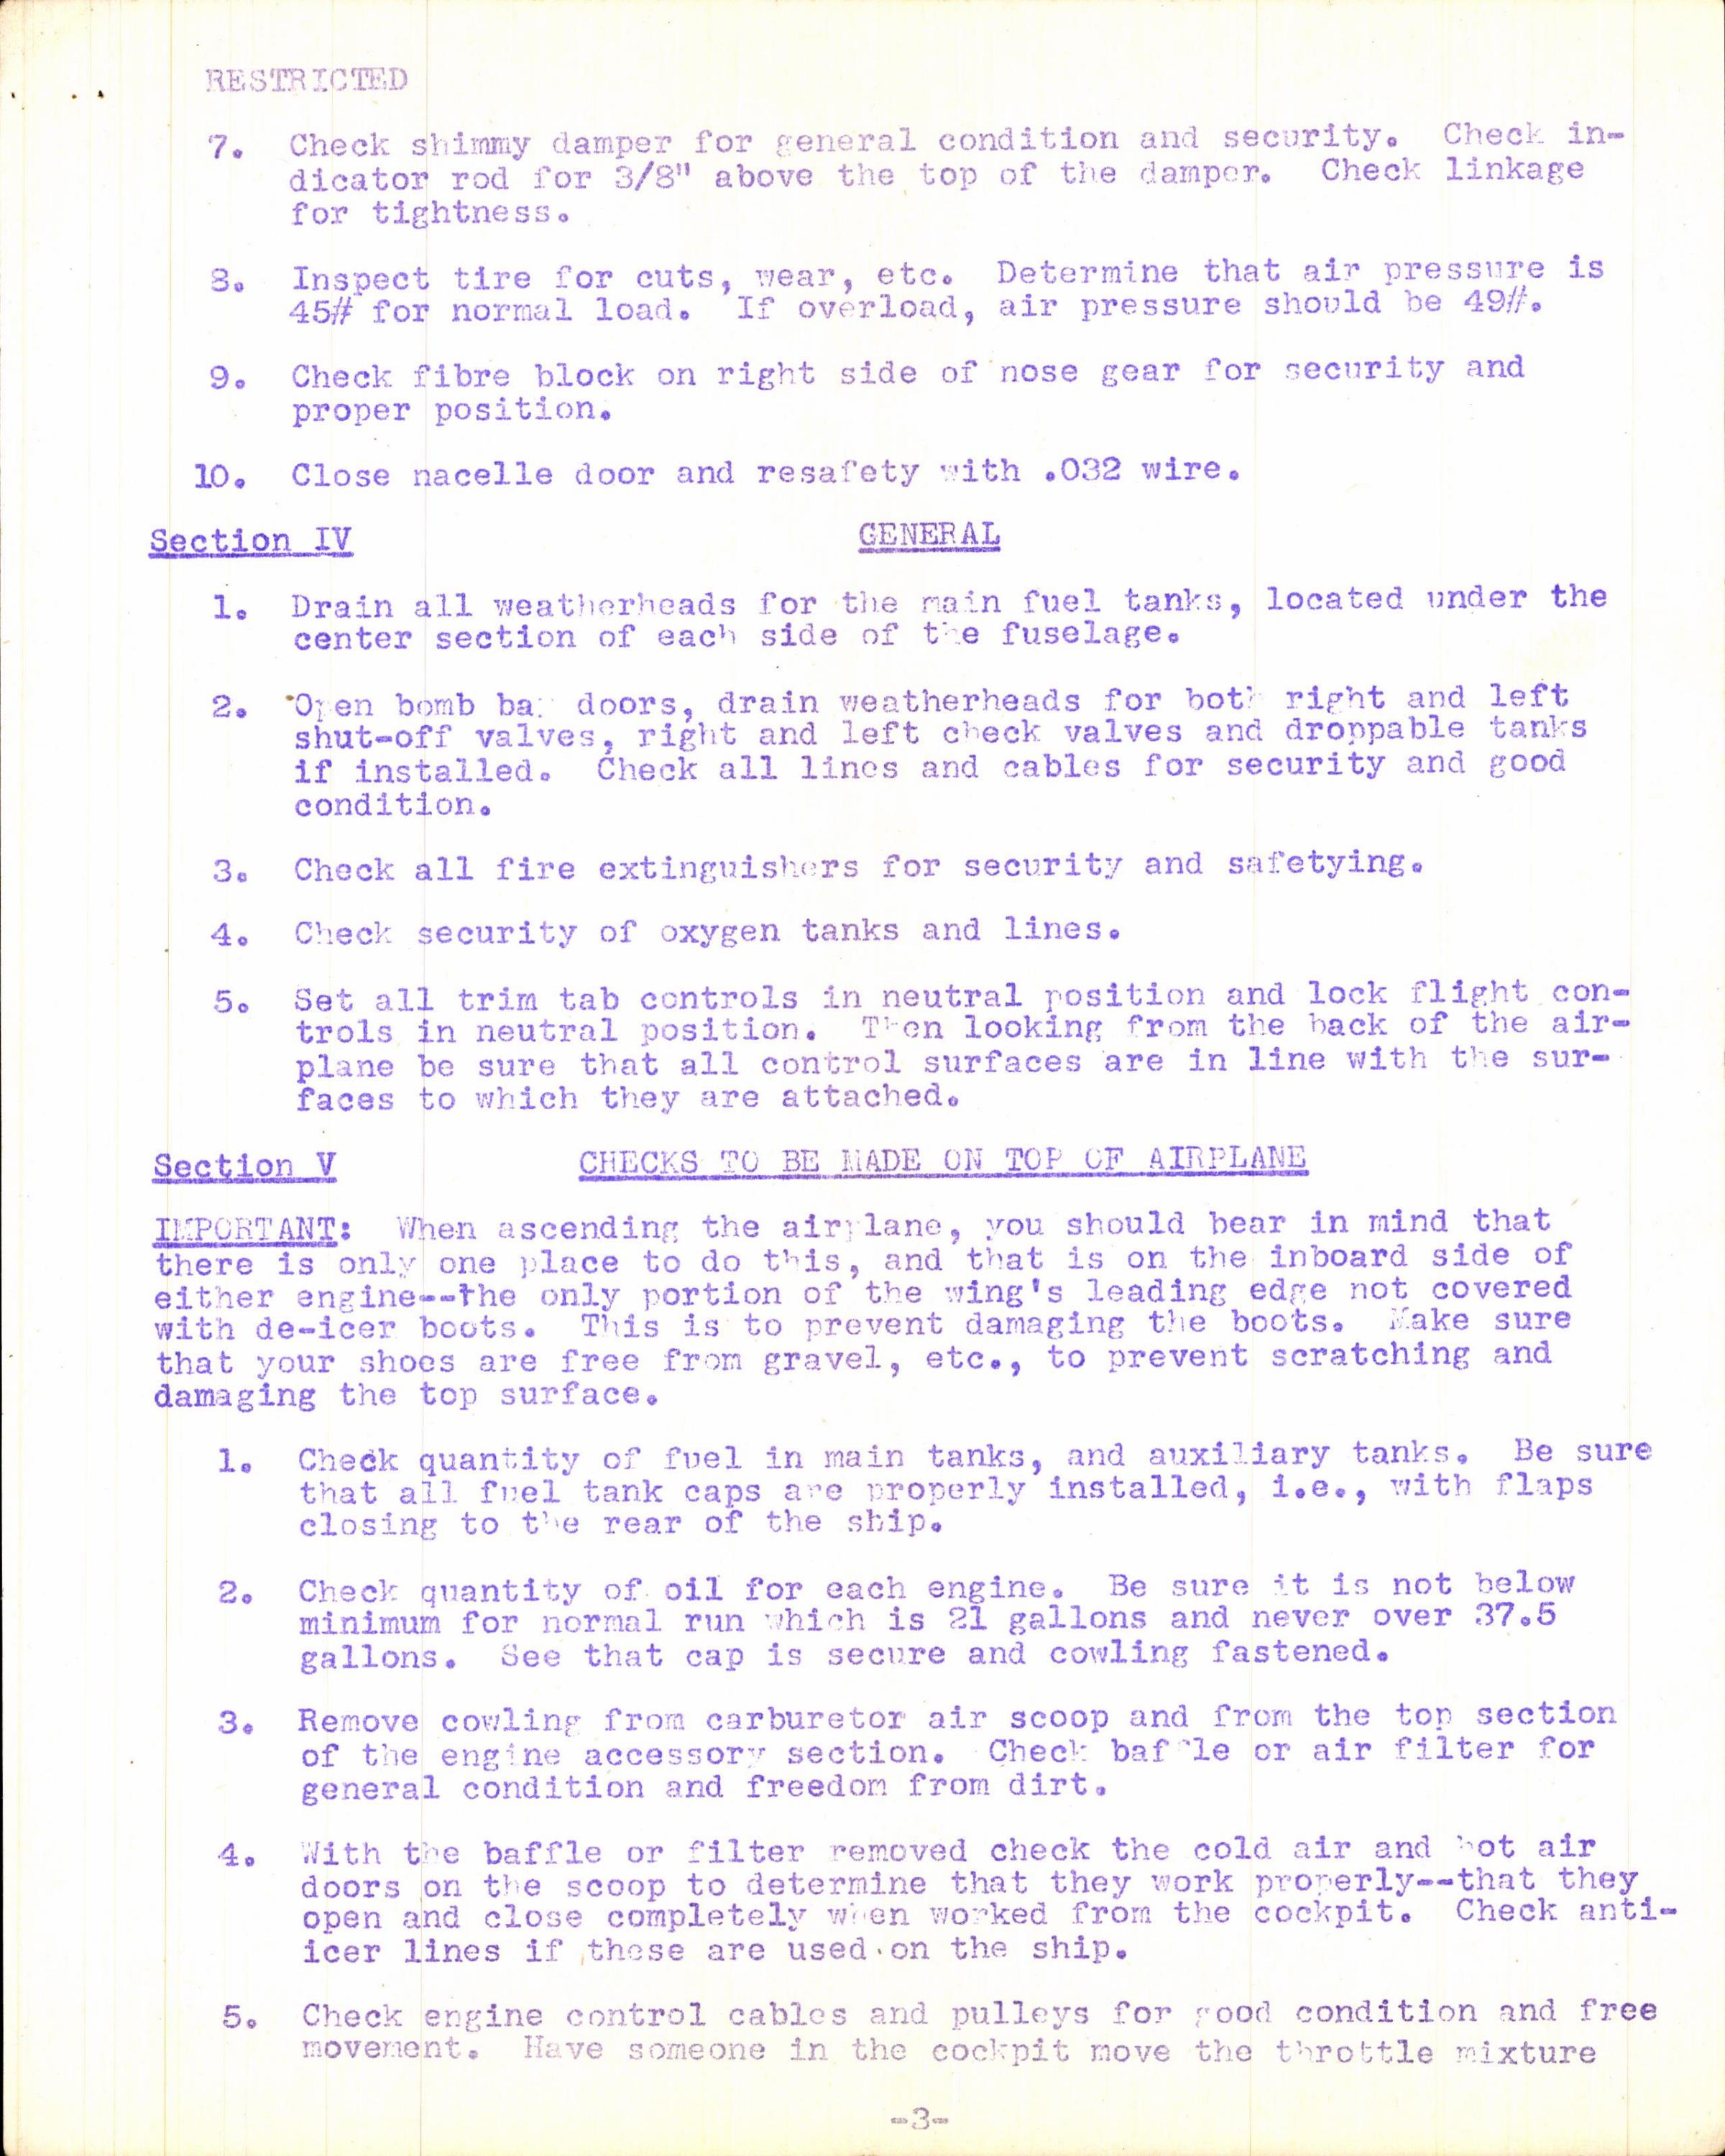 Sample page 5 from AirCorps Library document: Pre-Flight and Daily Inspection for B-25